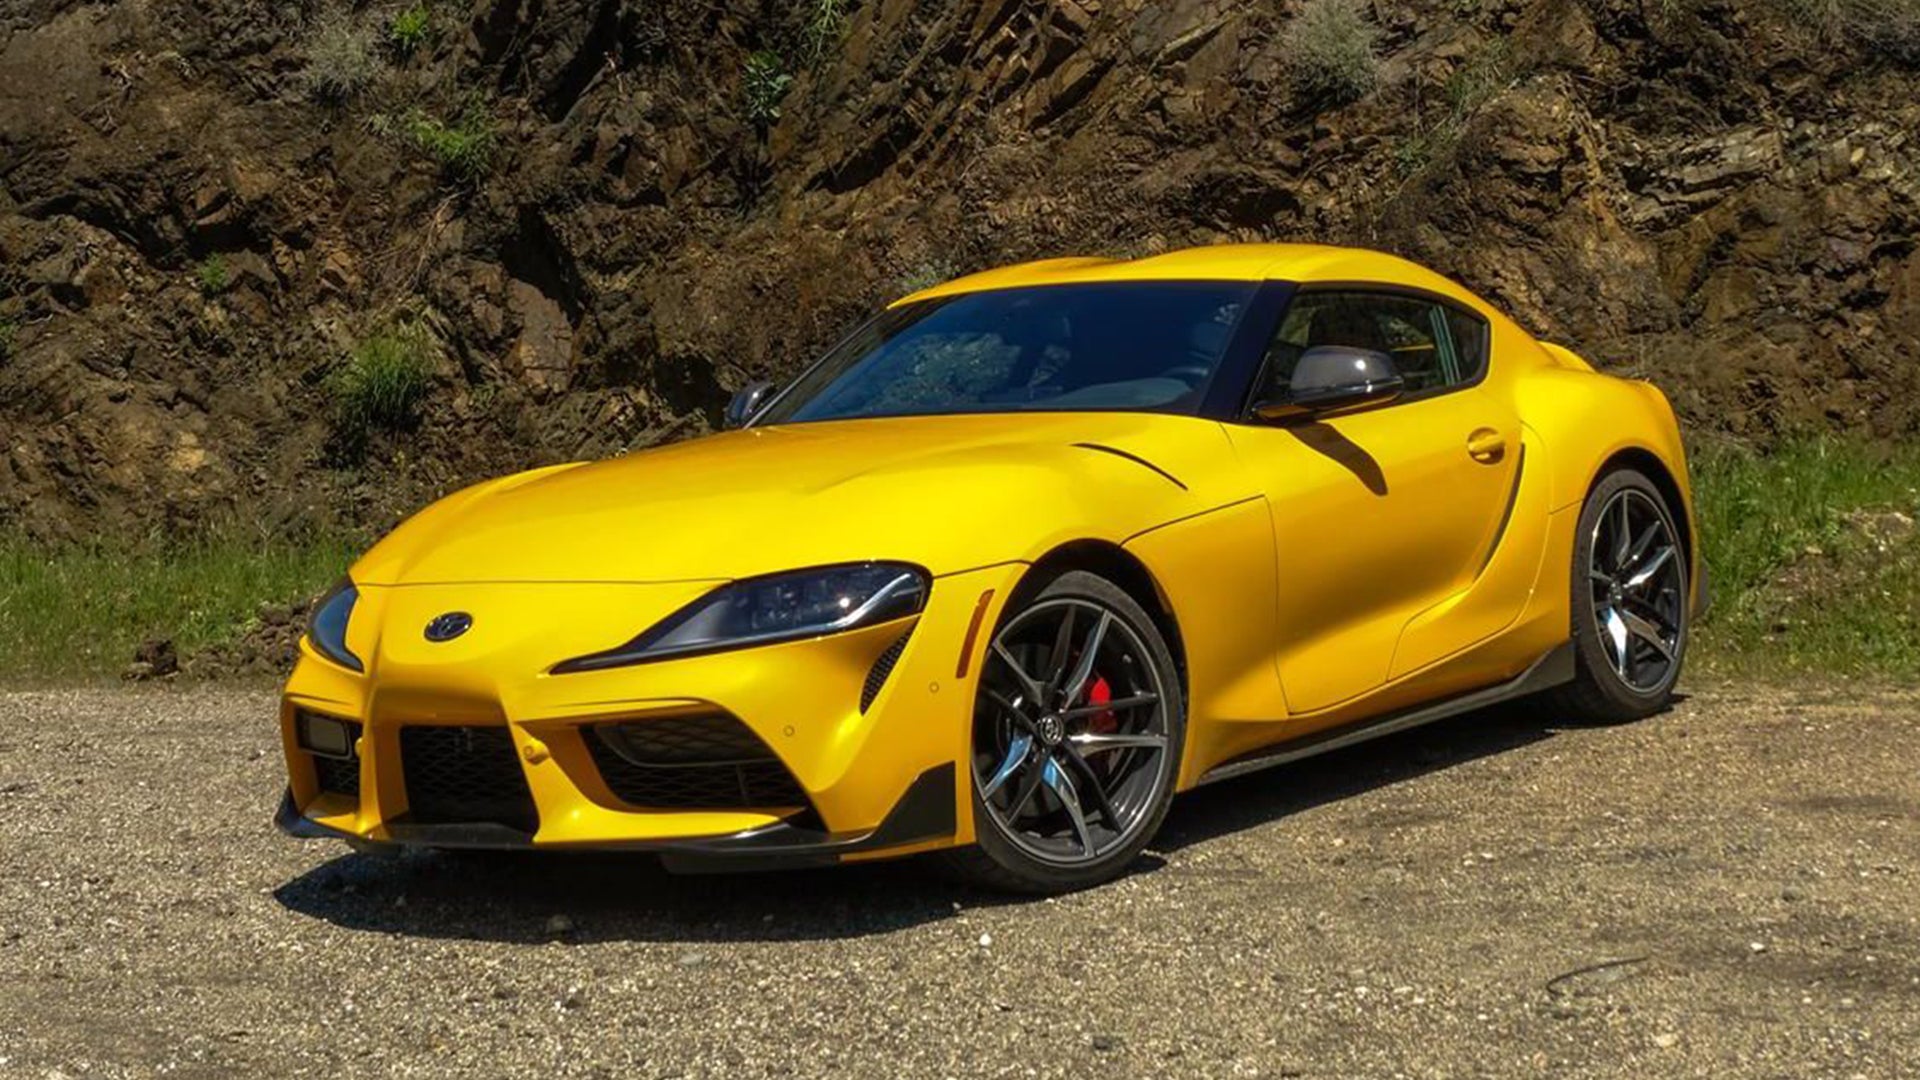 2020 Toyota Supra Review: What Toyota's Engineers Didn't Get Right